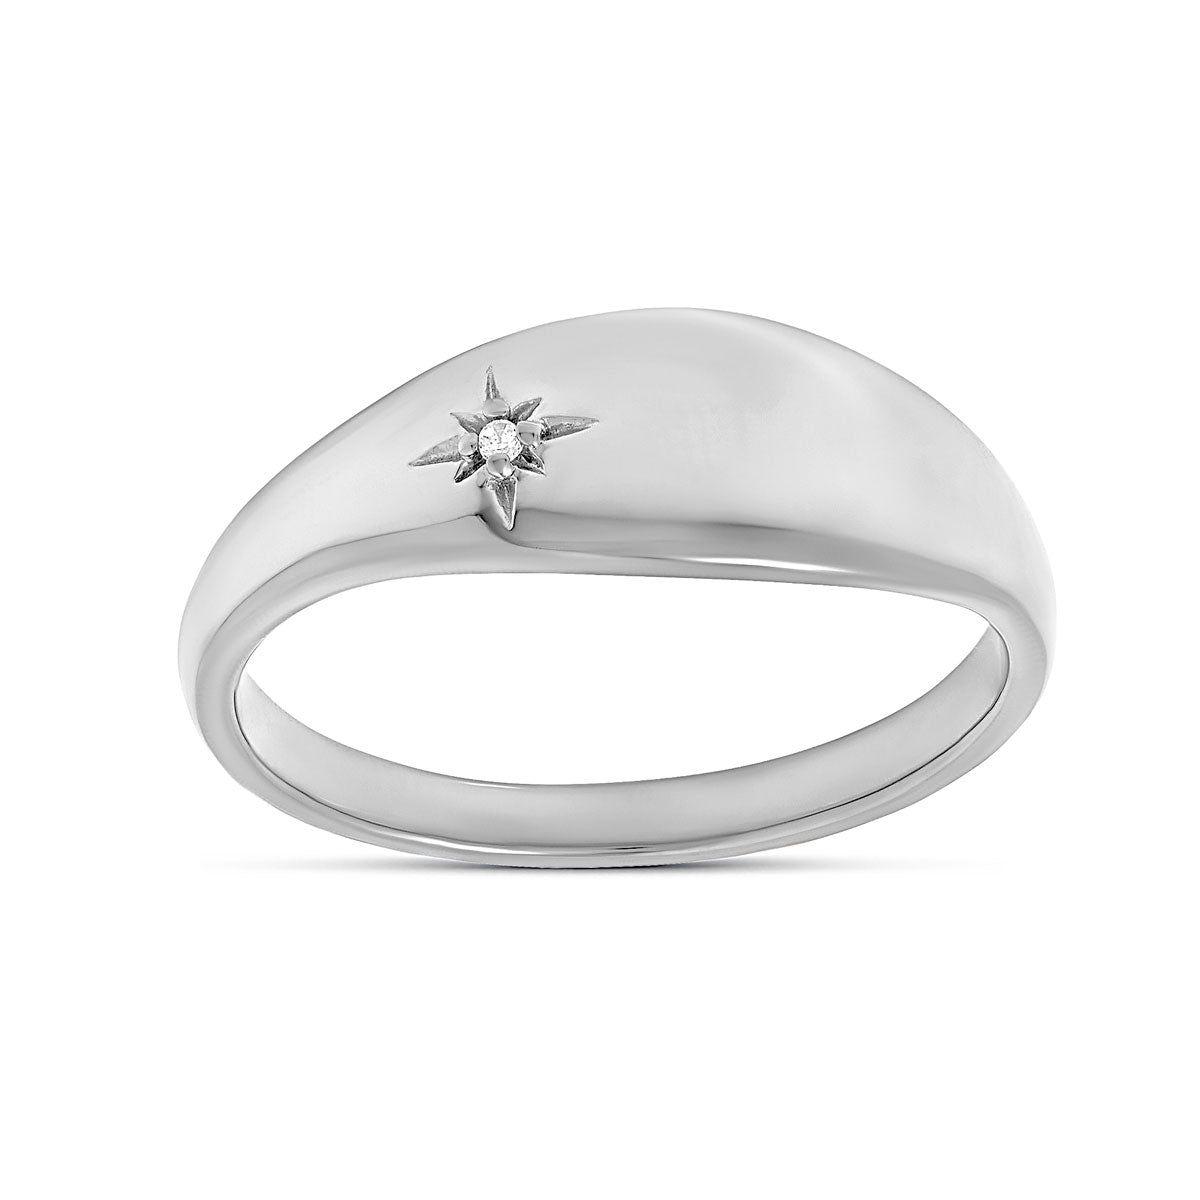 Celestial Dome Ring